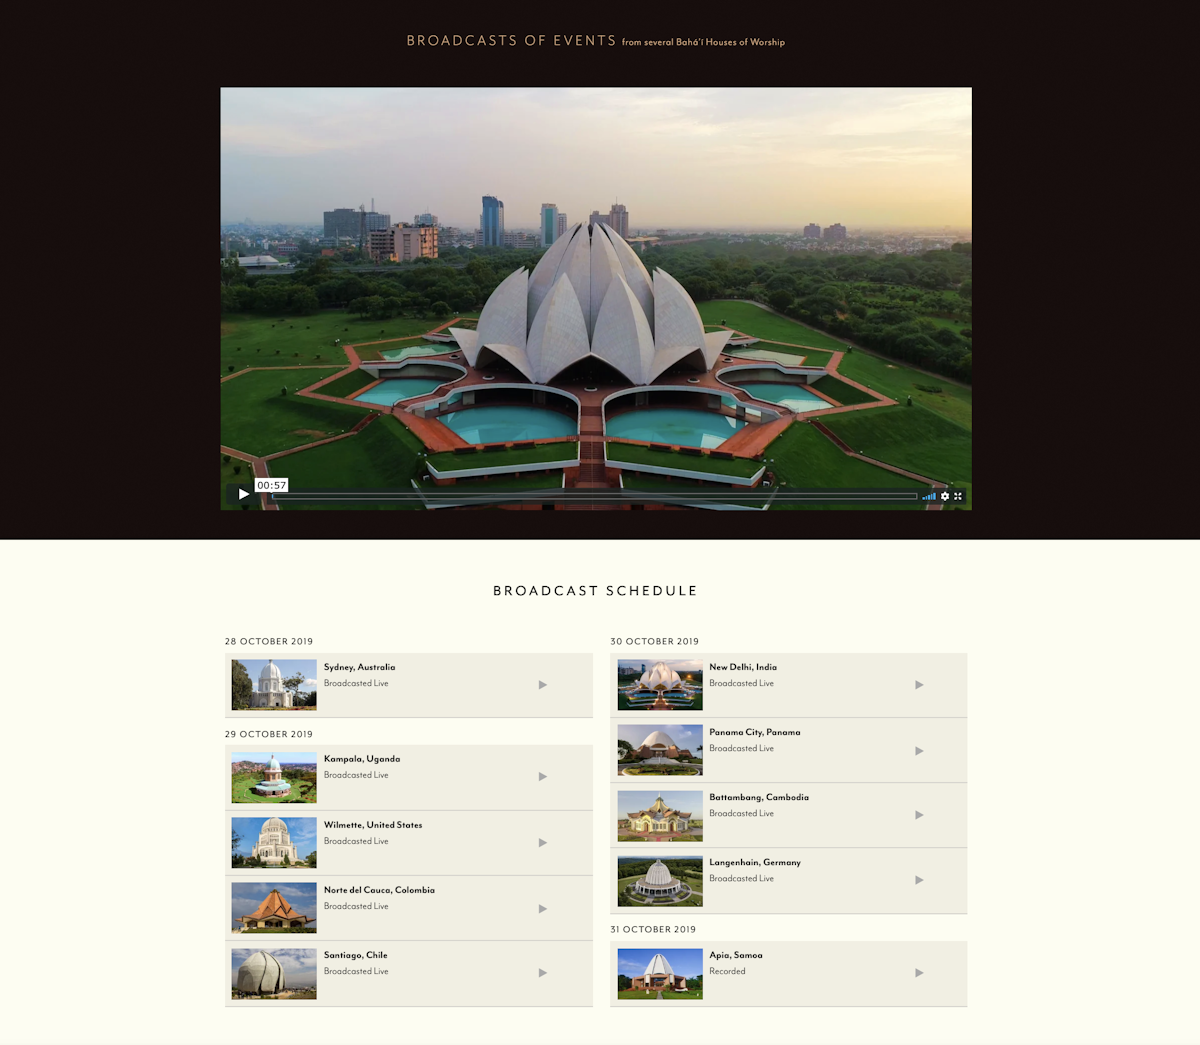 The bicentenary websites made available live broadcasts of the devotional programs that were held in Baha’i Houses of Worship on every continent.